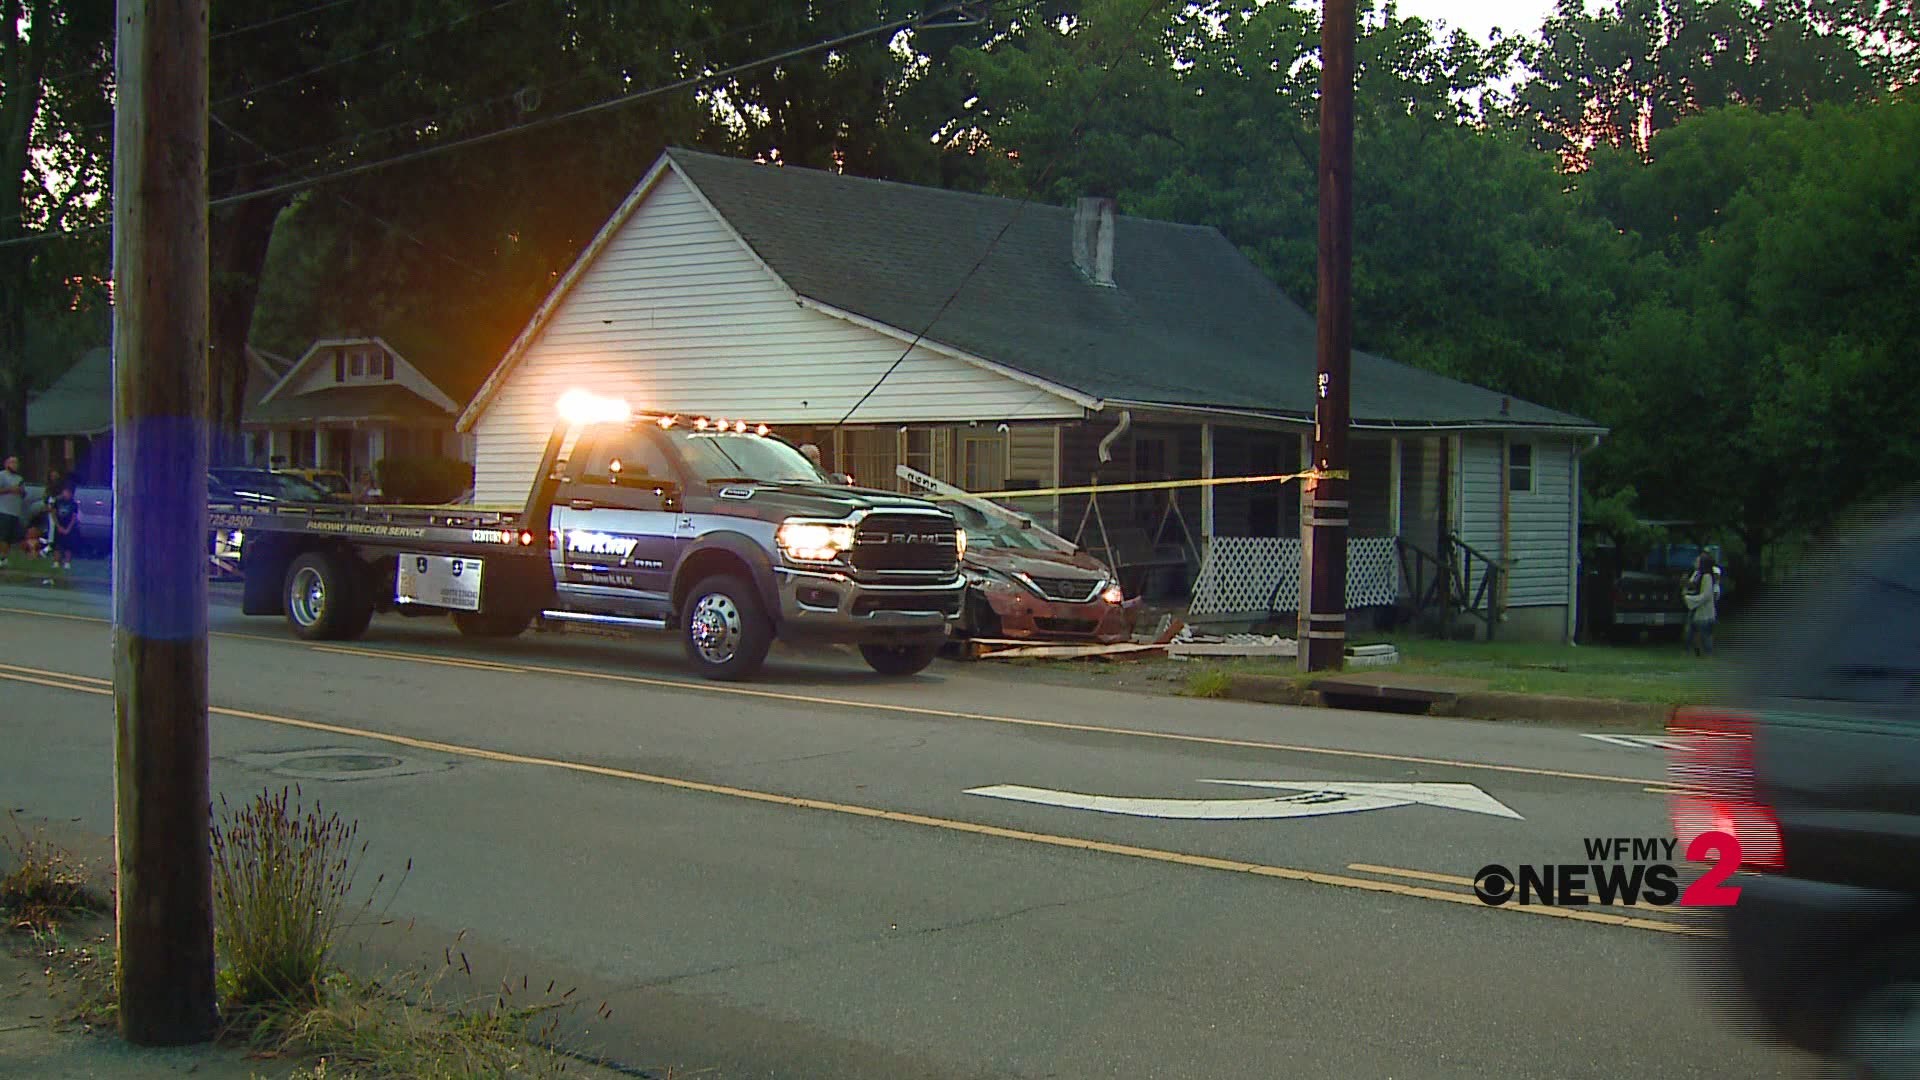 A car crashed into a house in Winston-Salem late Friday night.